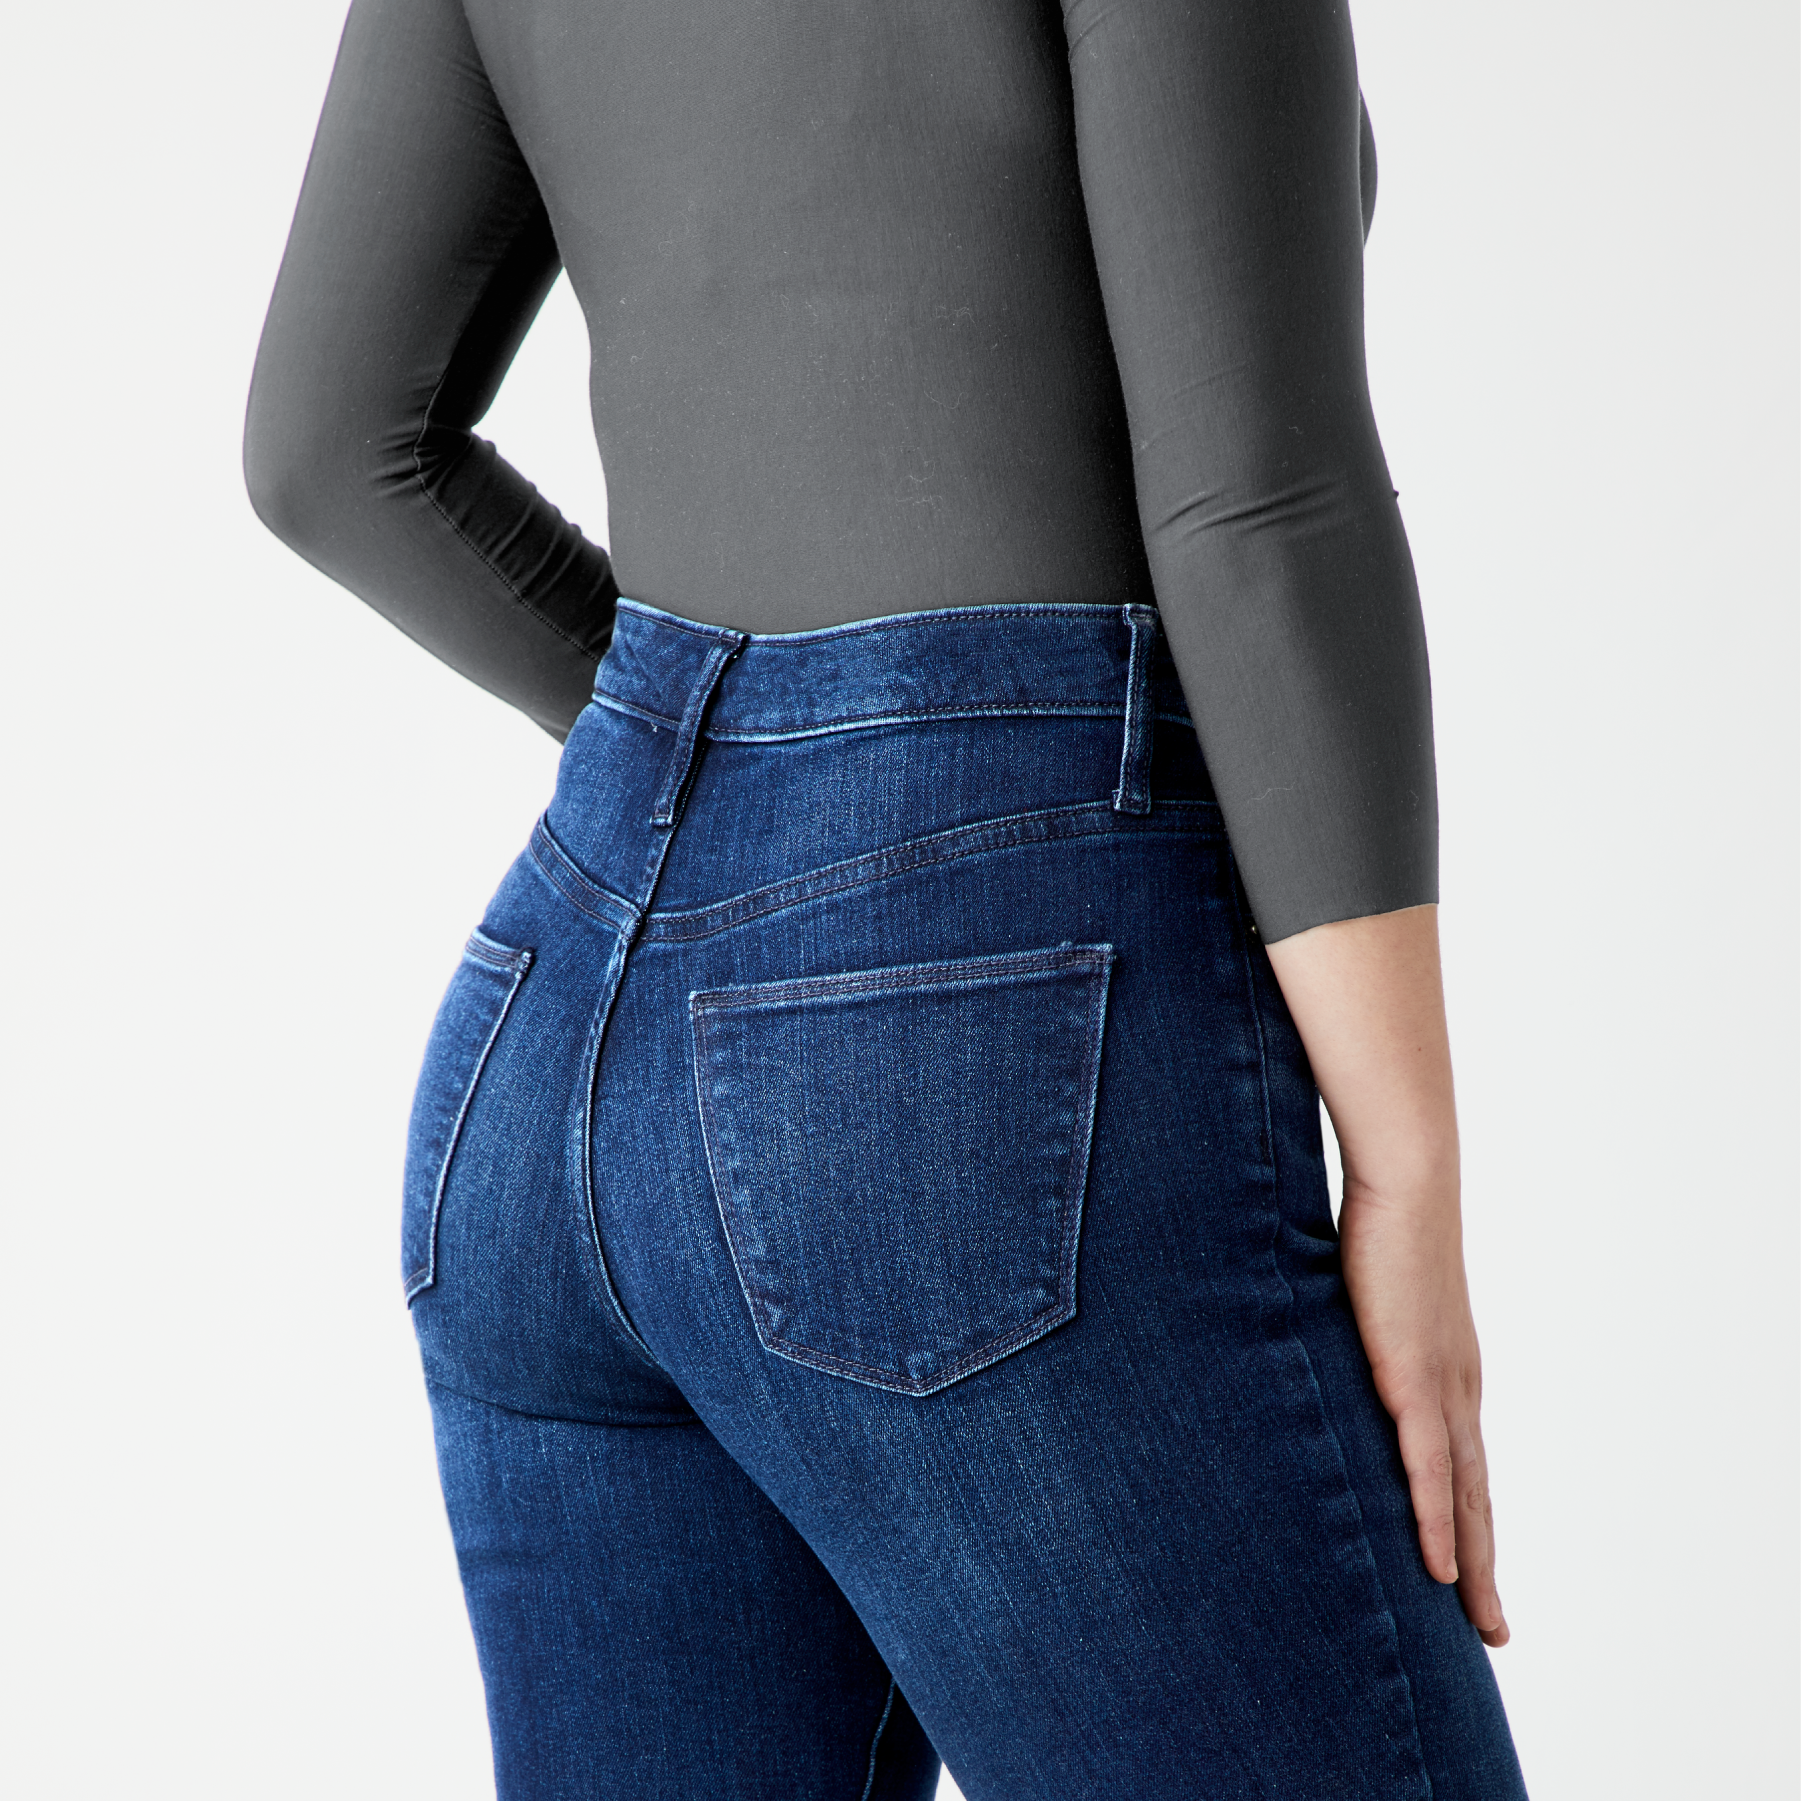 what are the best jeans for a flat bum